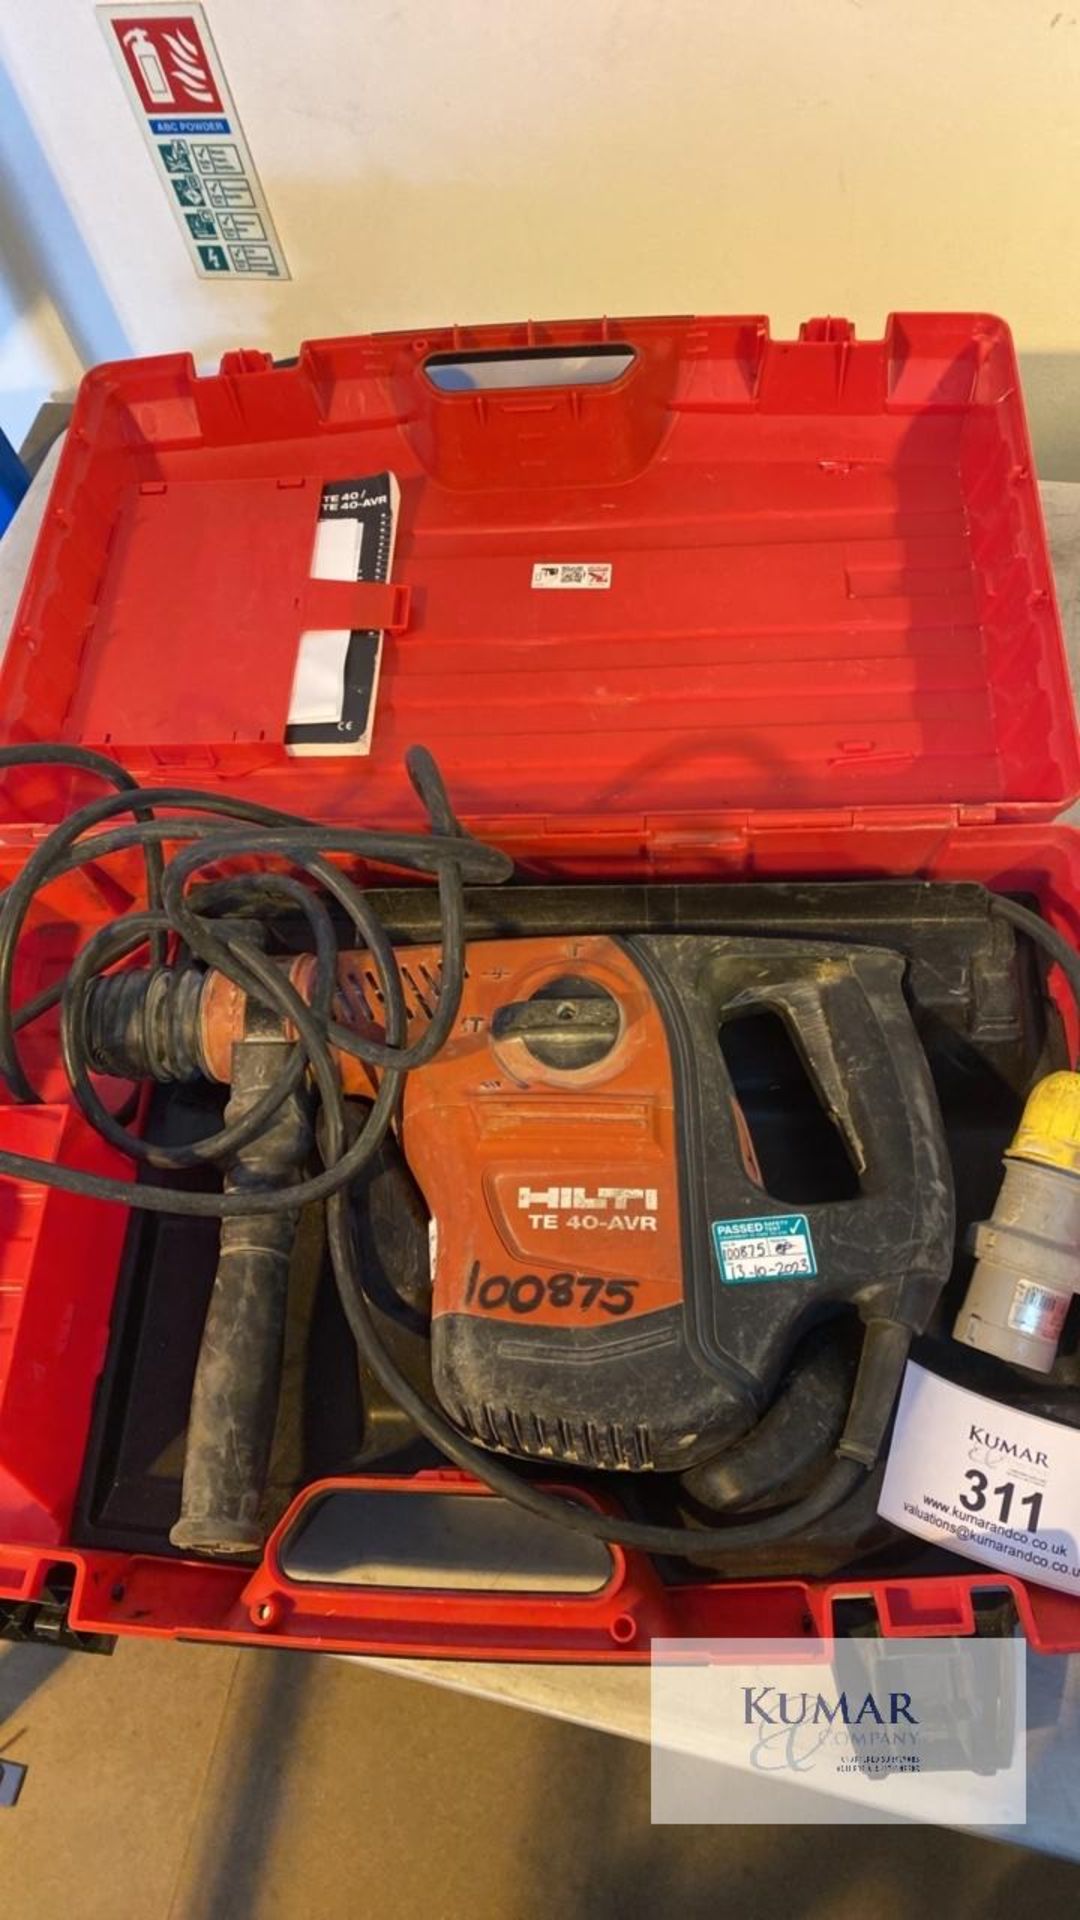 Hilti TE40-AVR 110 Volt Hammer Drill, Serial No.100875 with Carry Case - Image 7 of 7